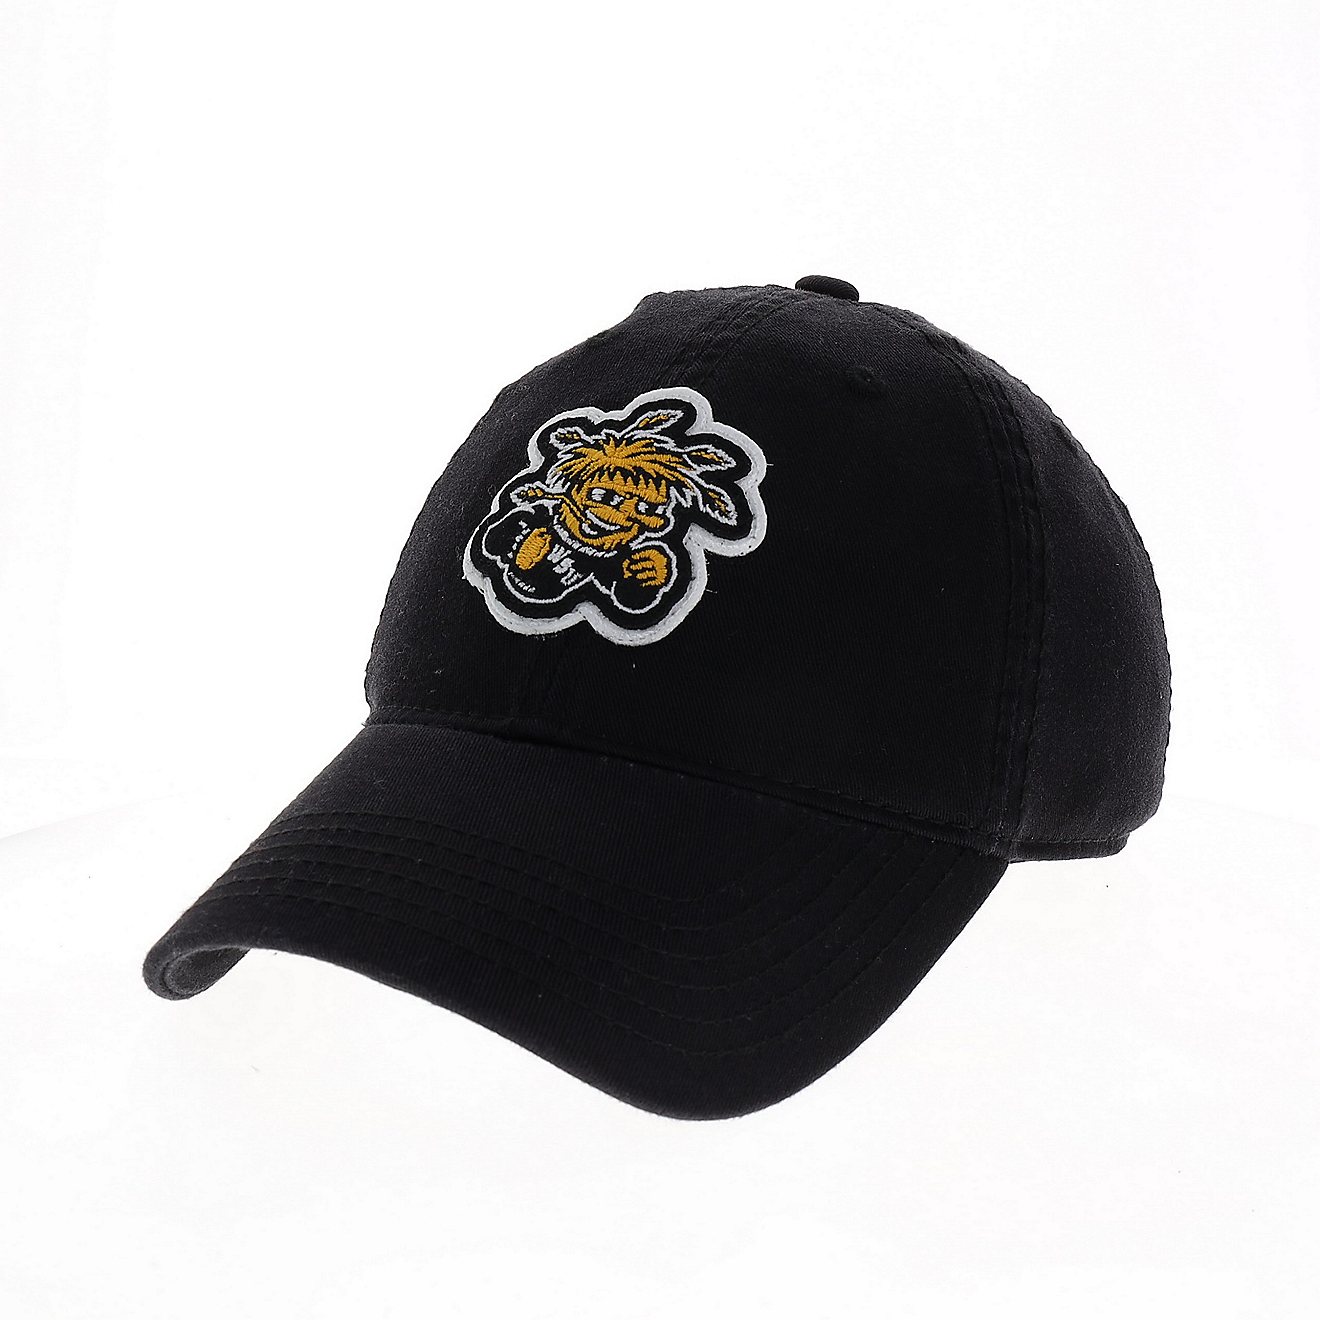 Legacy Sports Men’s Wichita State University Relaxed Twill Felt Cap                                                            - view number 1